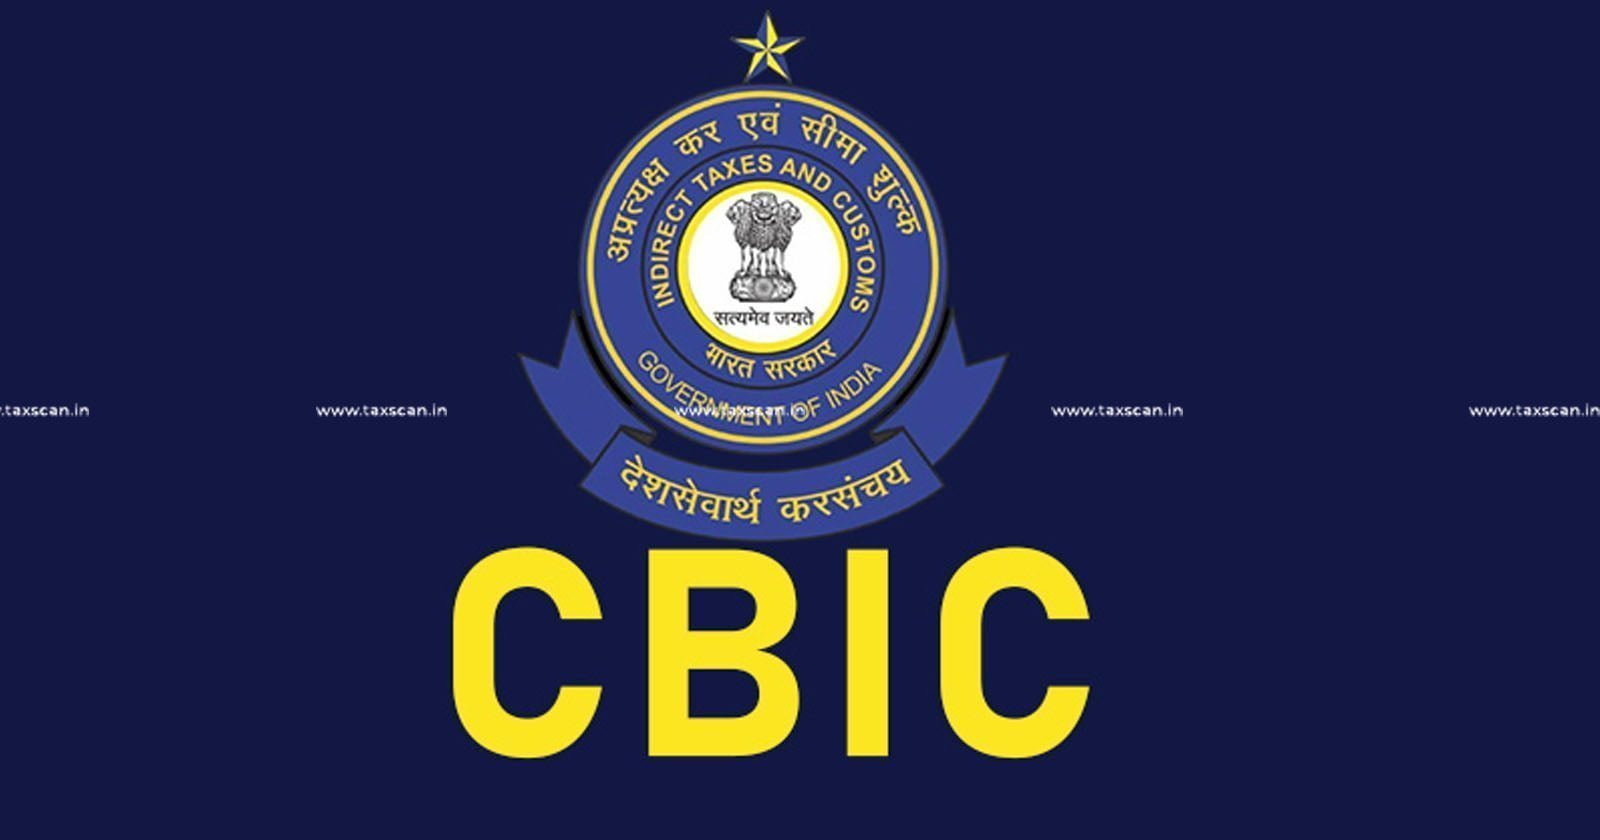 CBIC - Central Board of Indirect Taxes and Customs - Customs Duty